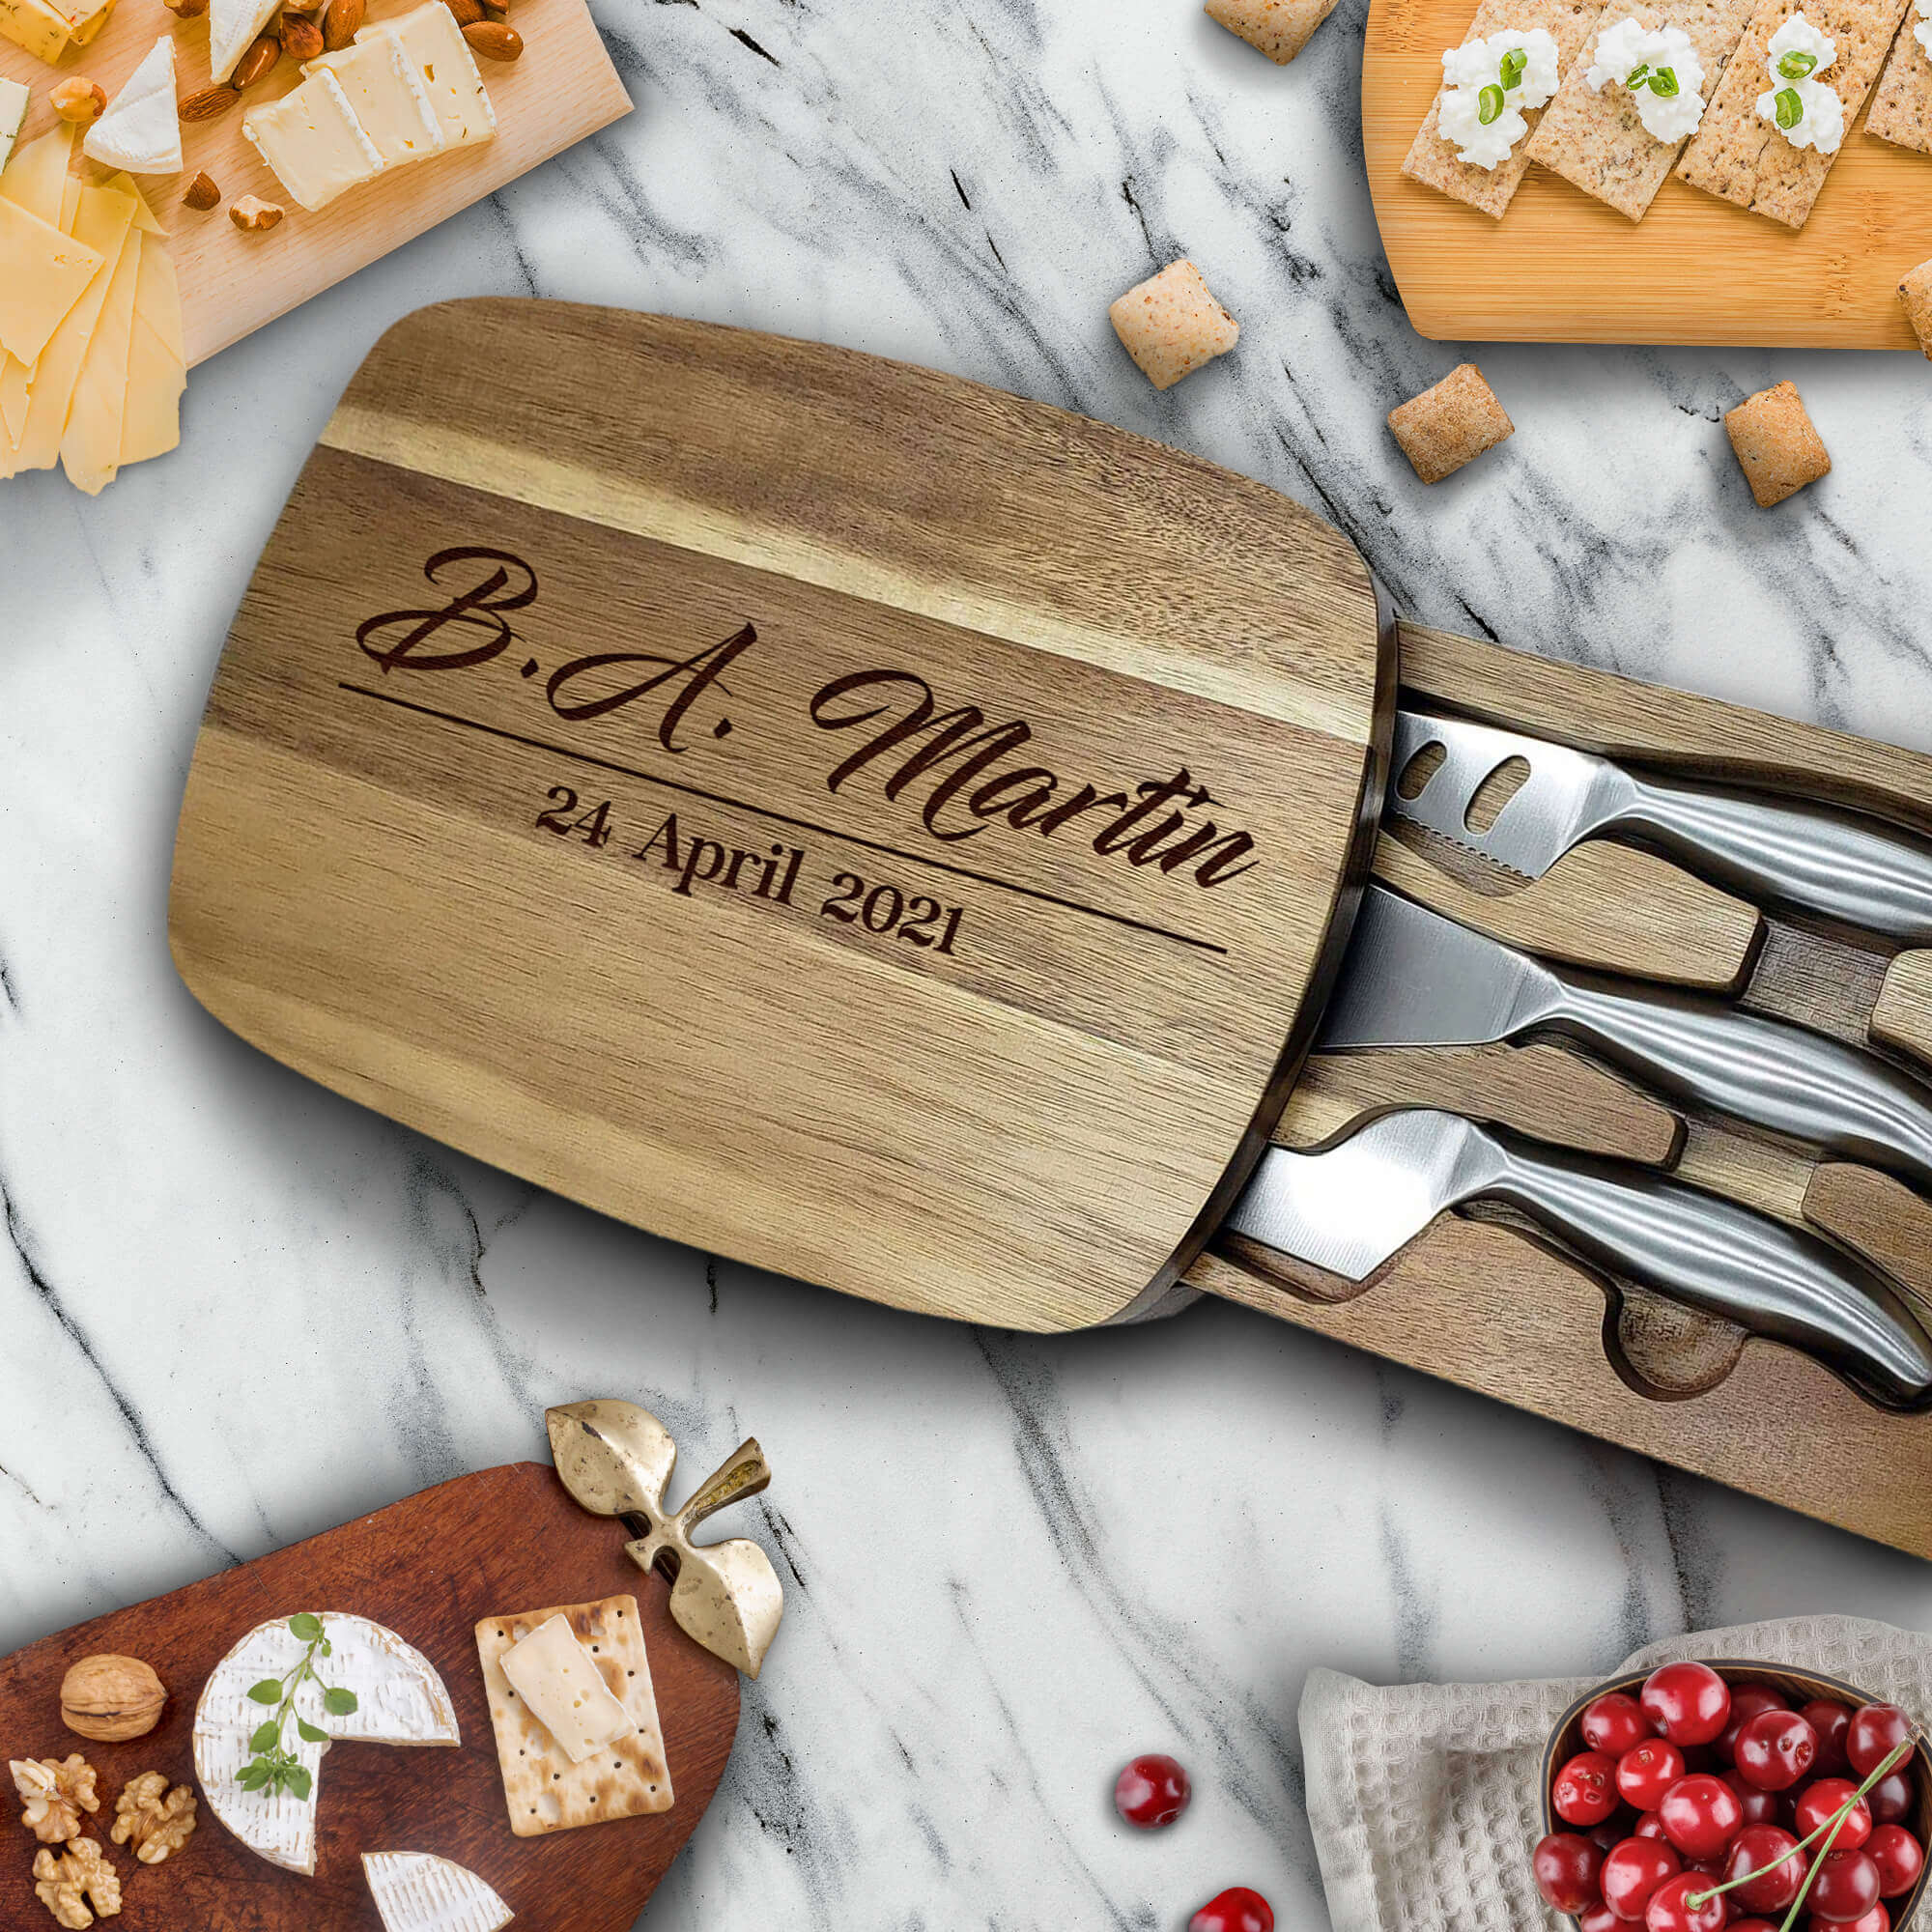 https://www.asperadesign.store/wp-content/uploads/2021/11/1.-Gift-Ideas-for-Couples-Anniversary-Gifts-Wooden-Serving-Board-Cheese-Board-and-Valentines-Charcuterie-Board-as-Kitchen-Counter-Decor-for-Weddings-and-Valentines-Aspera-Des.jpg